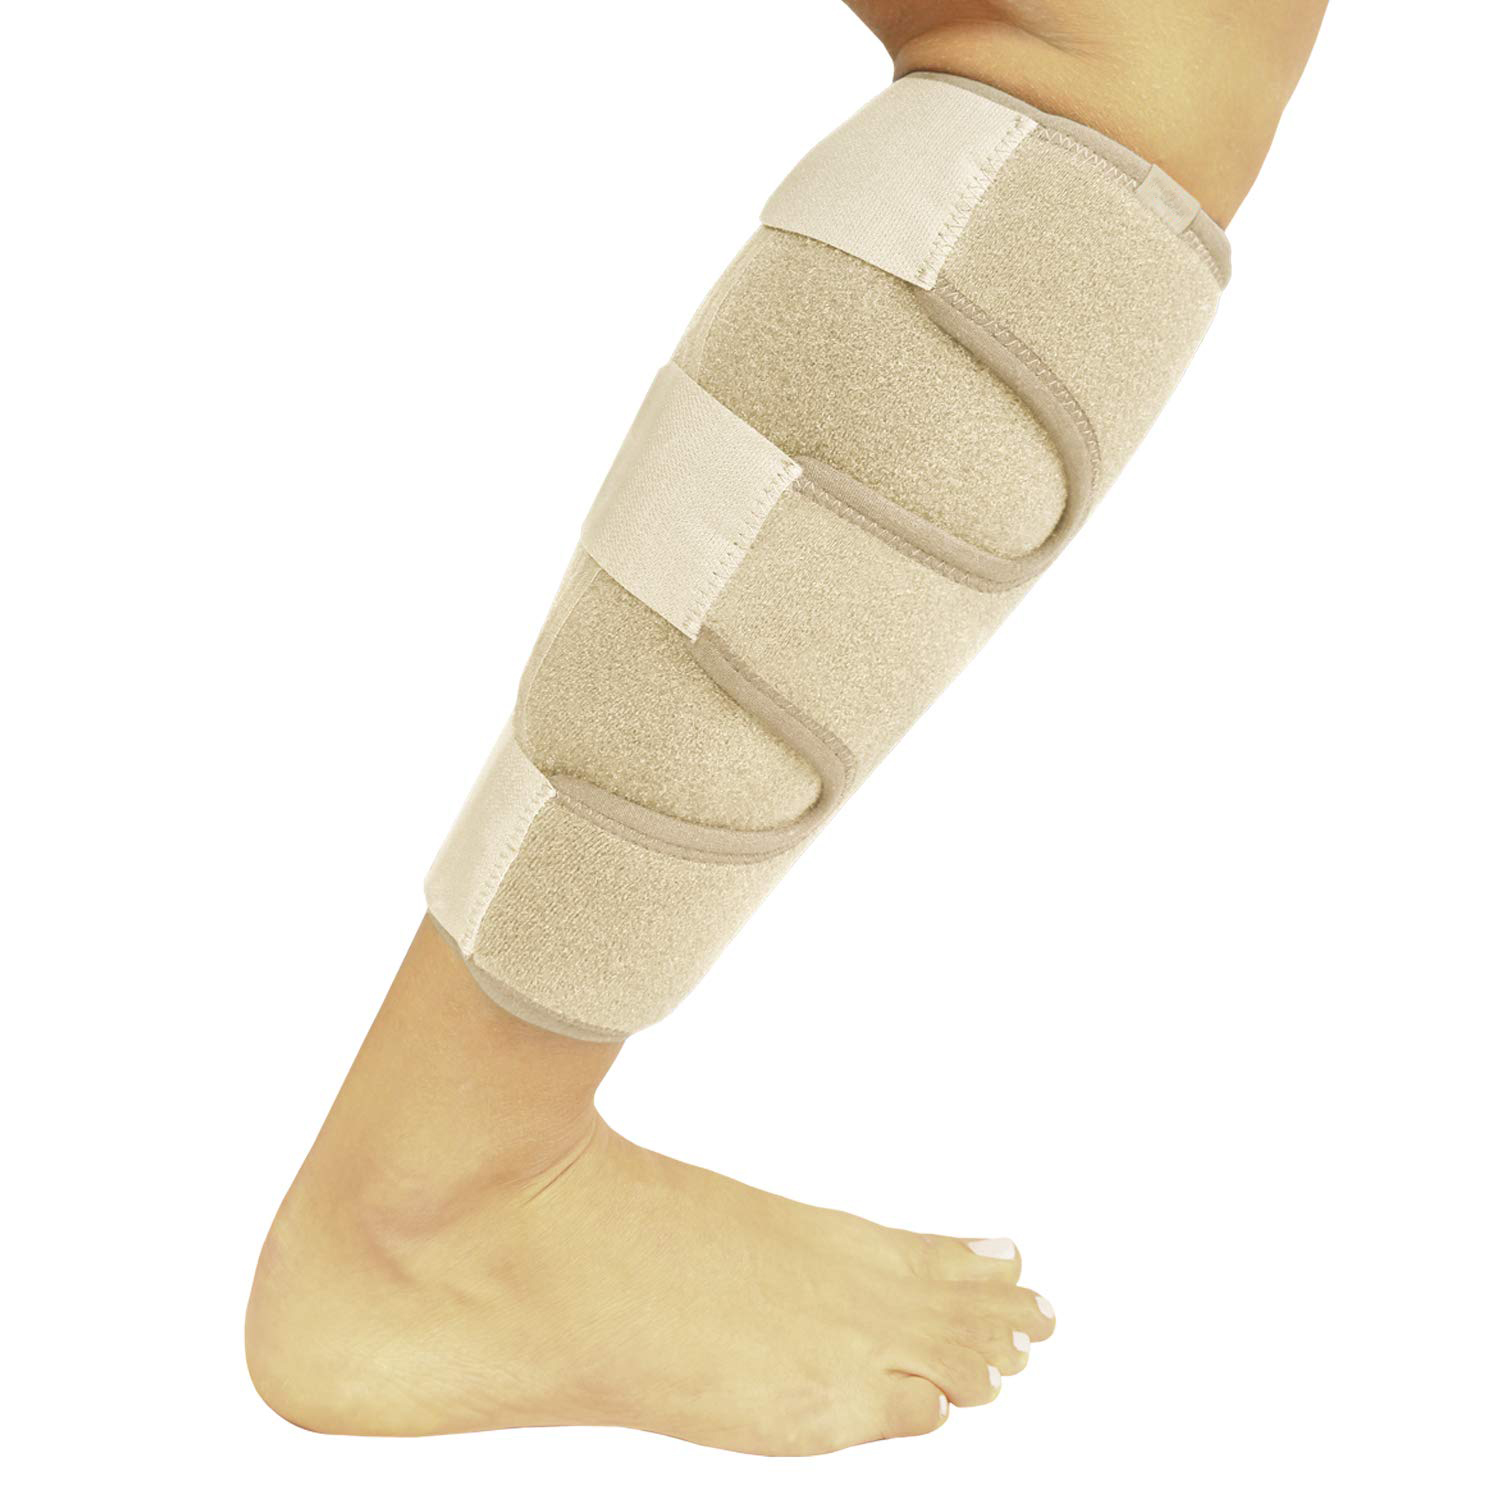 Wholesale Adjustable Shin Splint Support – Lower Leg Compression Wrap  Increases Circulation, Reduces Muscle Swelling – Calf Sleeve for Men and  Women – Pain Relief manufacturers and suppliers